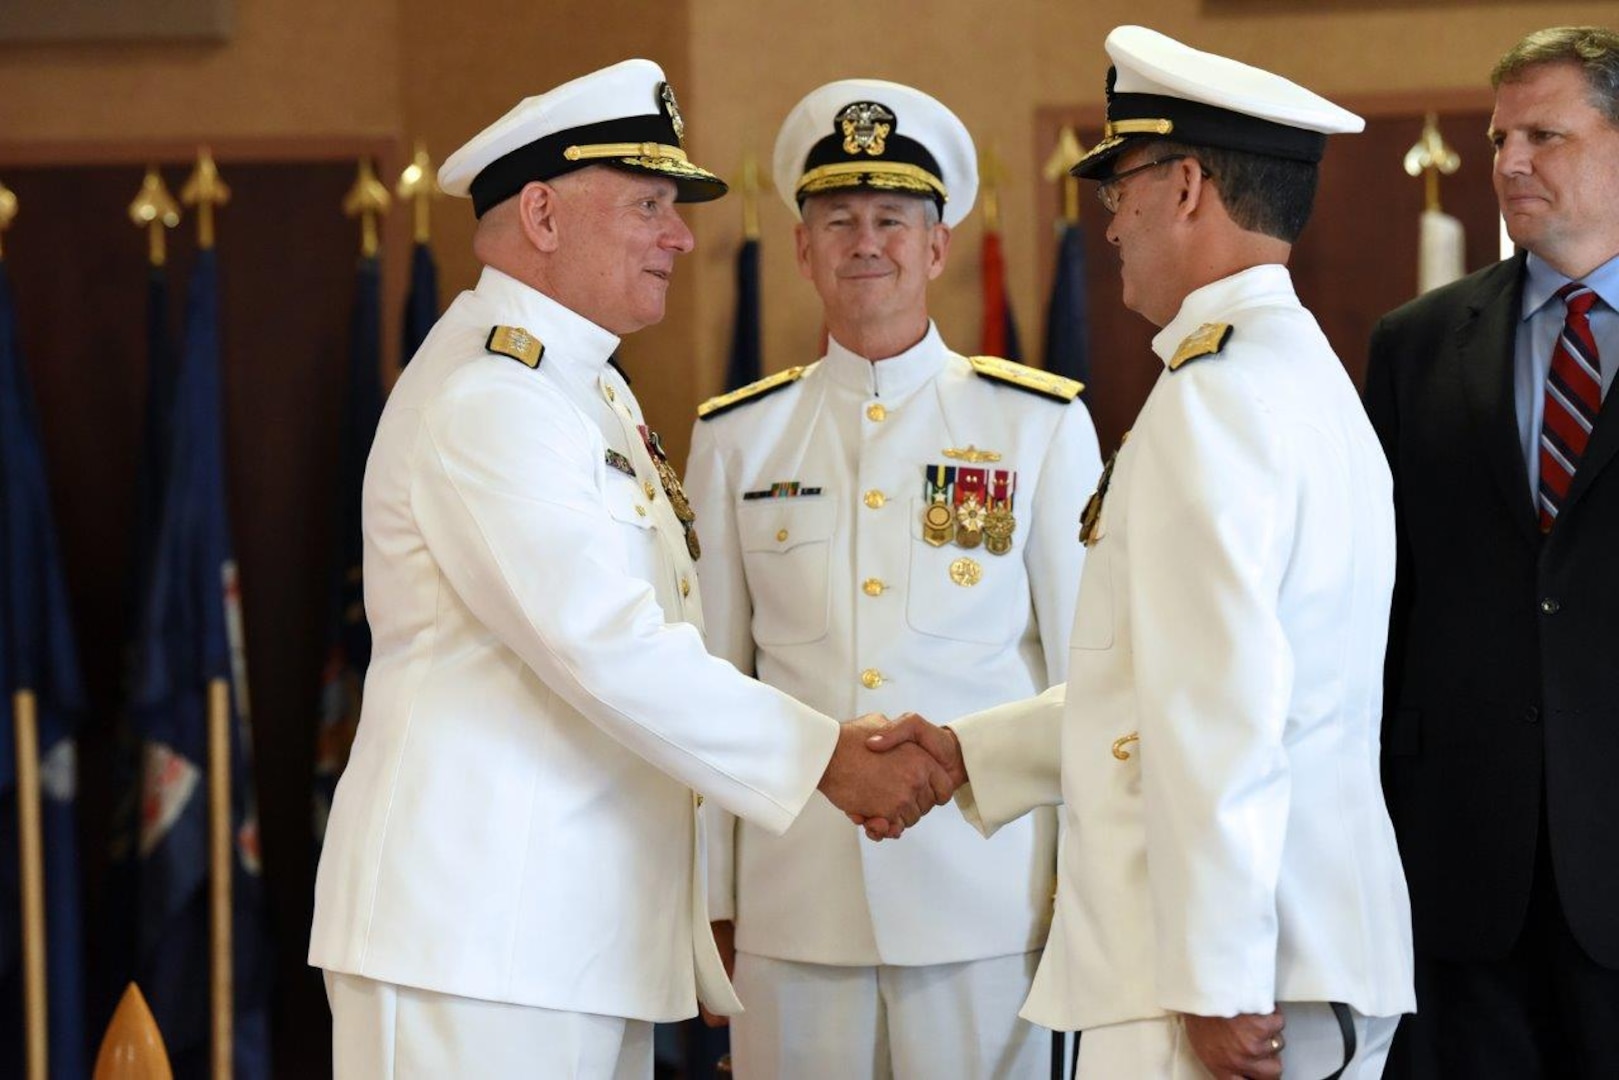 Rear Adm. Michael Jabaley congratulates Rear Adm. David Goggins on assuming duties as Program Executive Officer (PEO) for Submarines at a change of office ceremony at the Washington Navy Yard Aug. 17. PEO Submarines is responsible for developing, acquiring and modernizing the U.S. Navy's submarines and undersea systems.